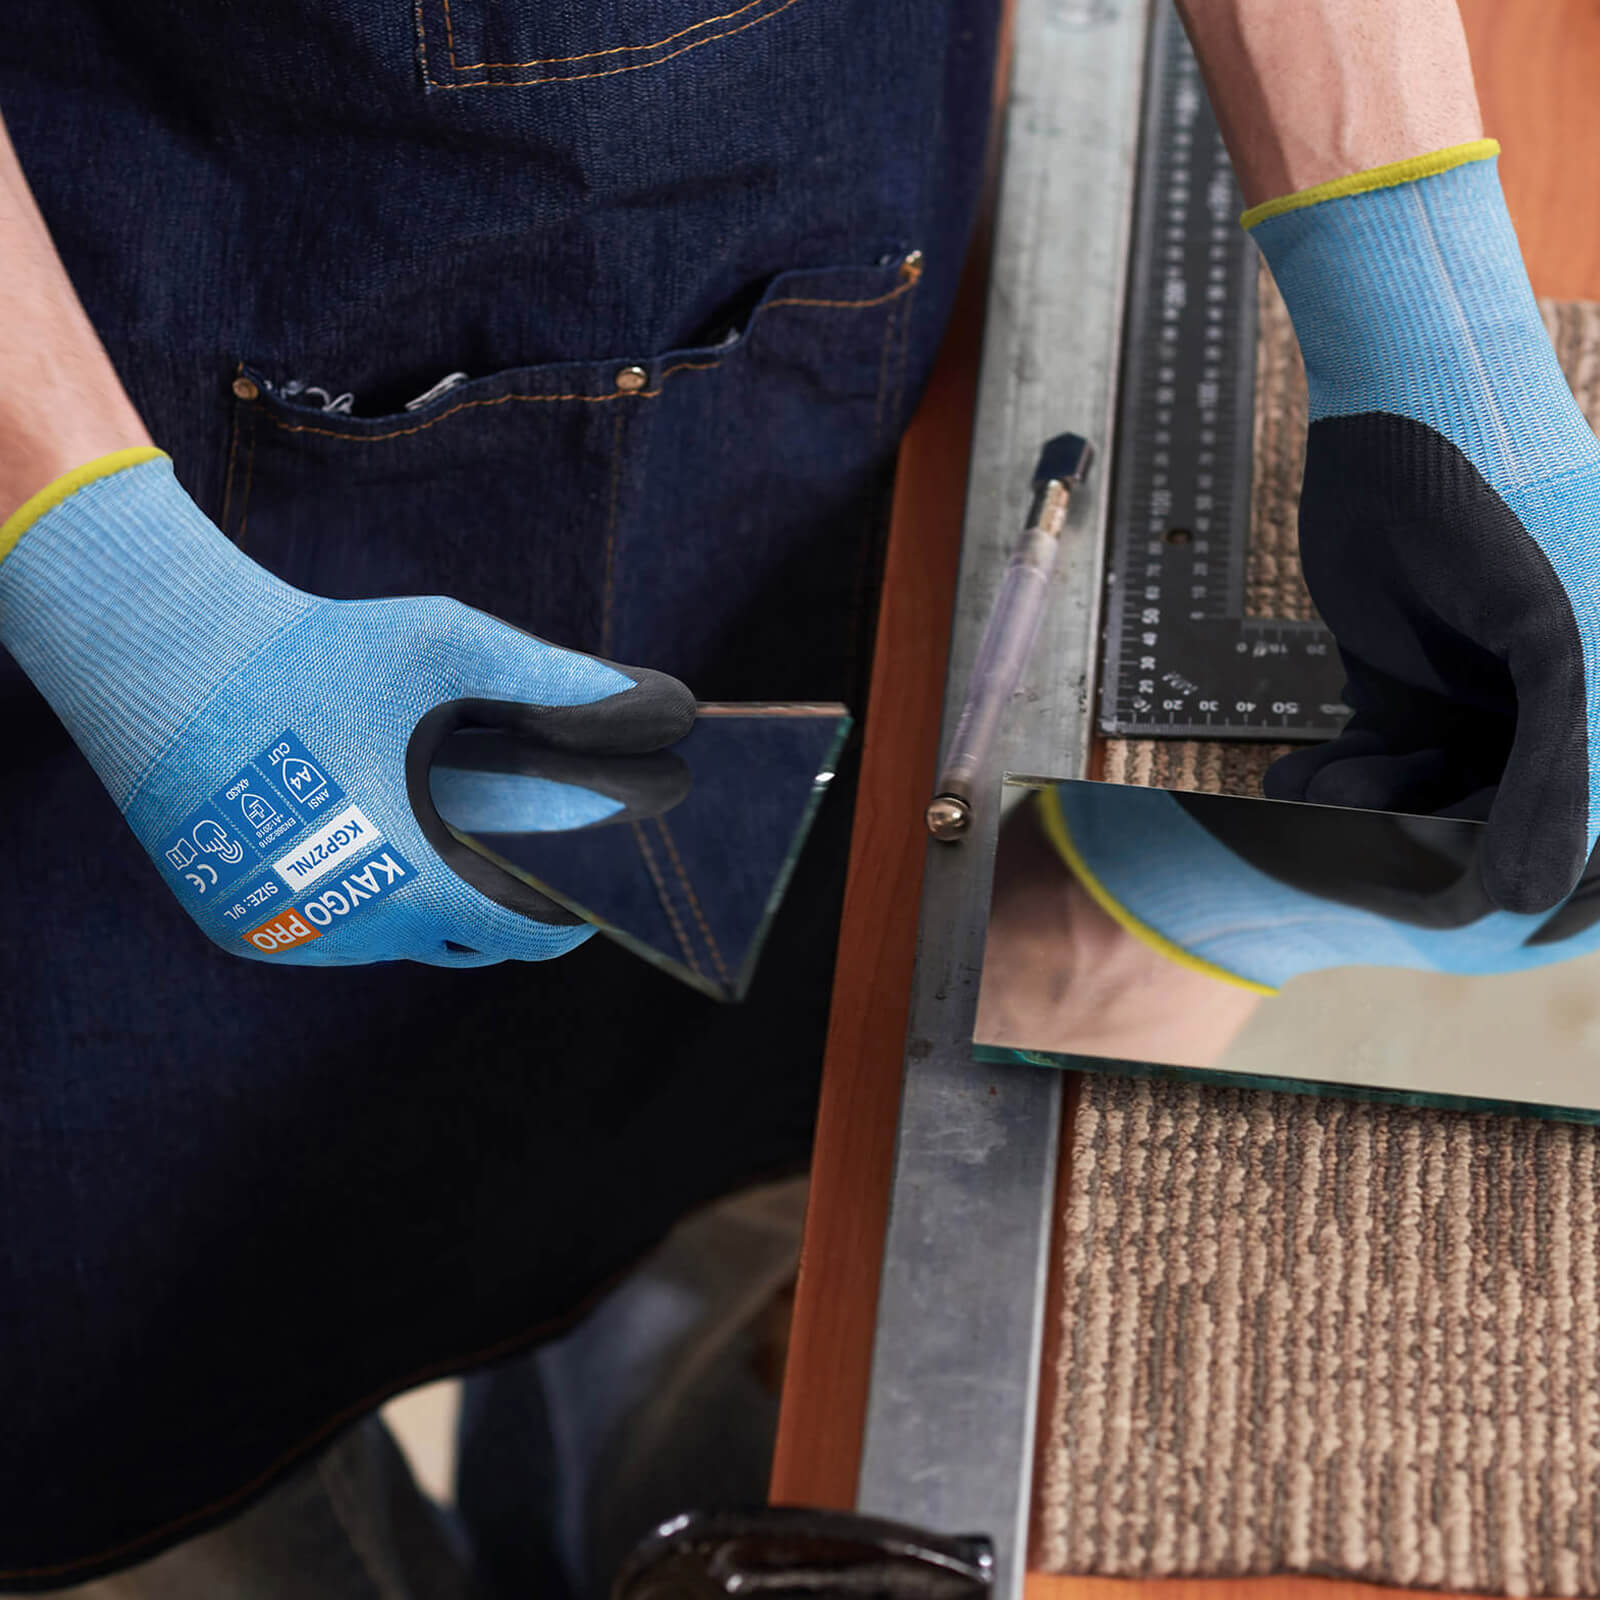 A4 Cut Resistant Gloves with Nitrile Coated MicroFoam Grip on Palm & Fingers - Touchscreen Compatible